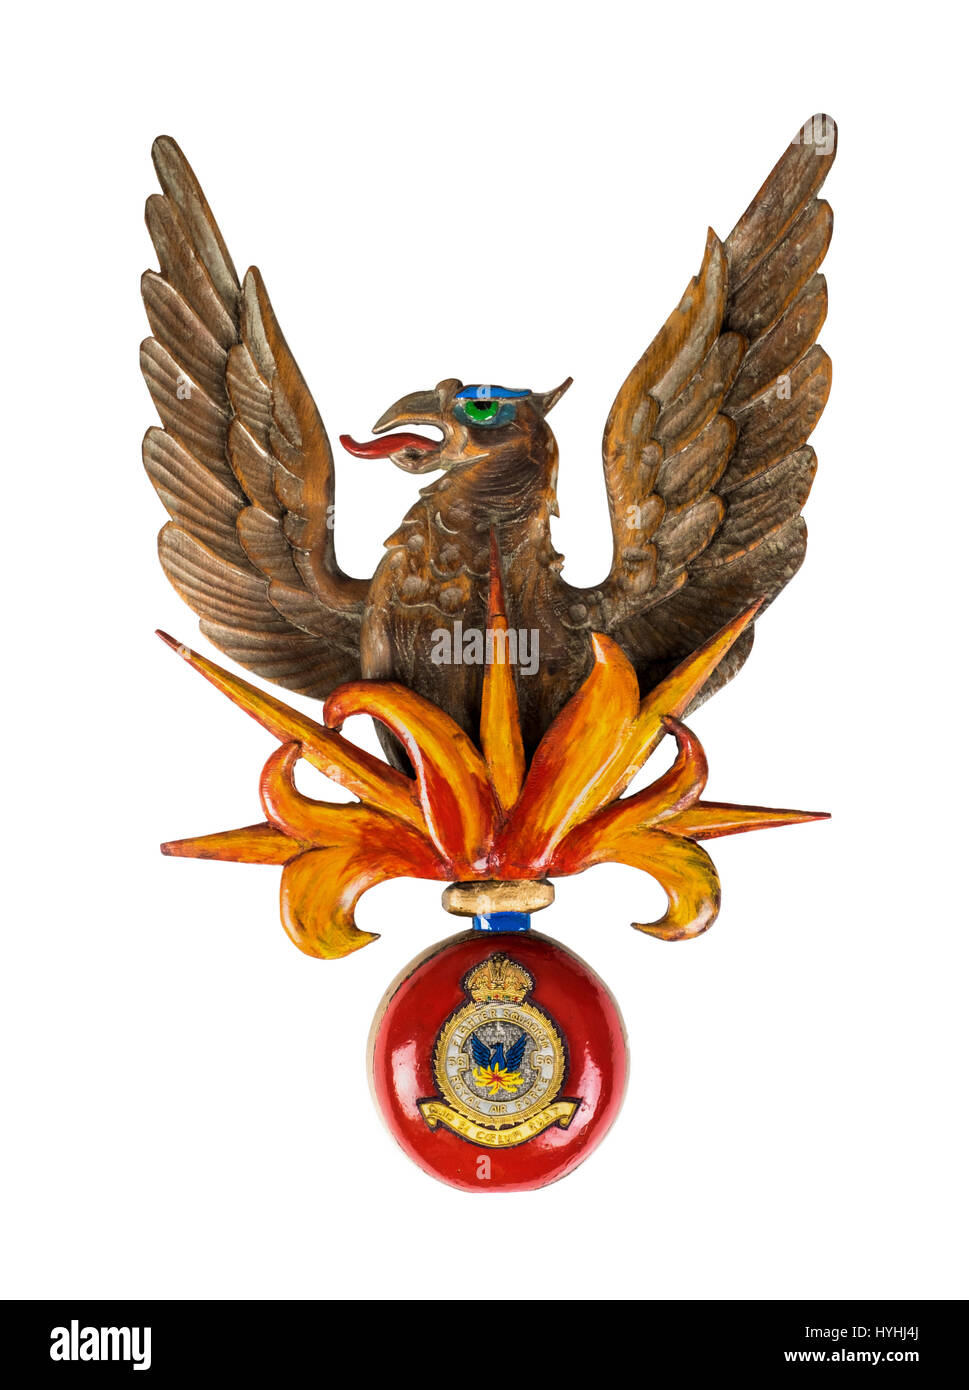 Carved phoenix emblem of No 56 Fighter Squadron of the Royal Air Force, with a burst of flames beneath and a WW2 cloth squadron blazer badge below. Stock Photo